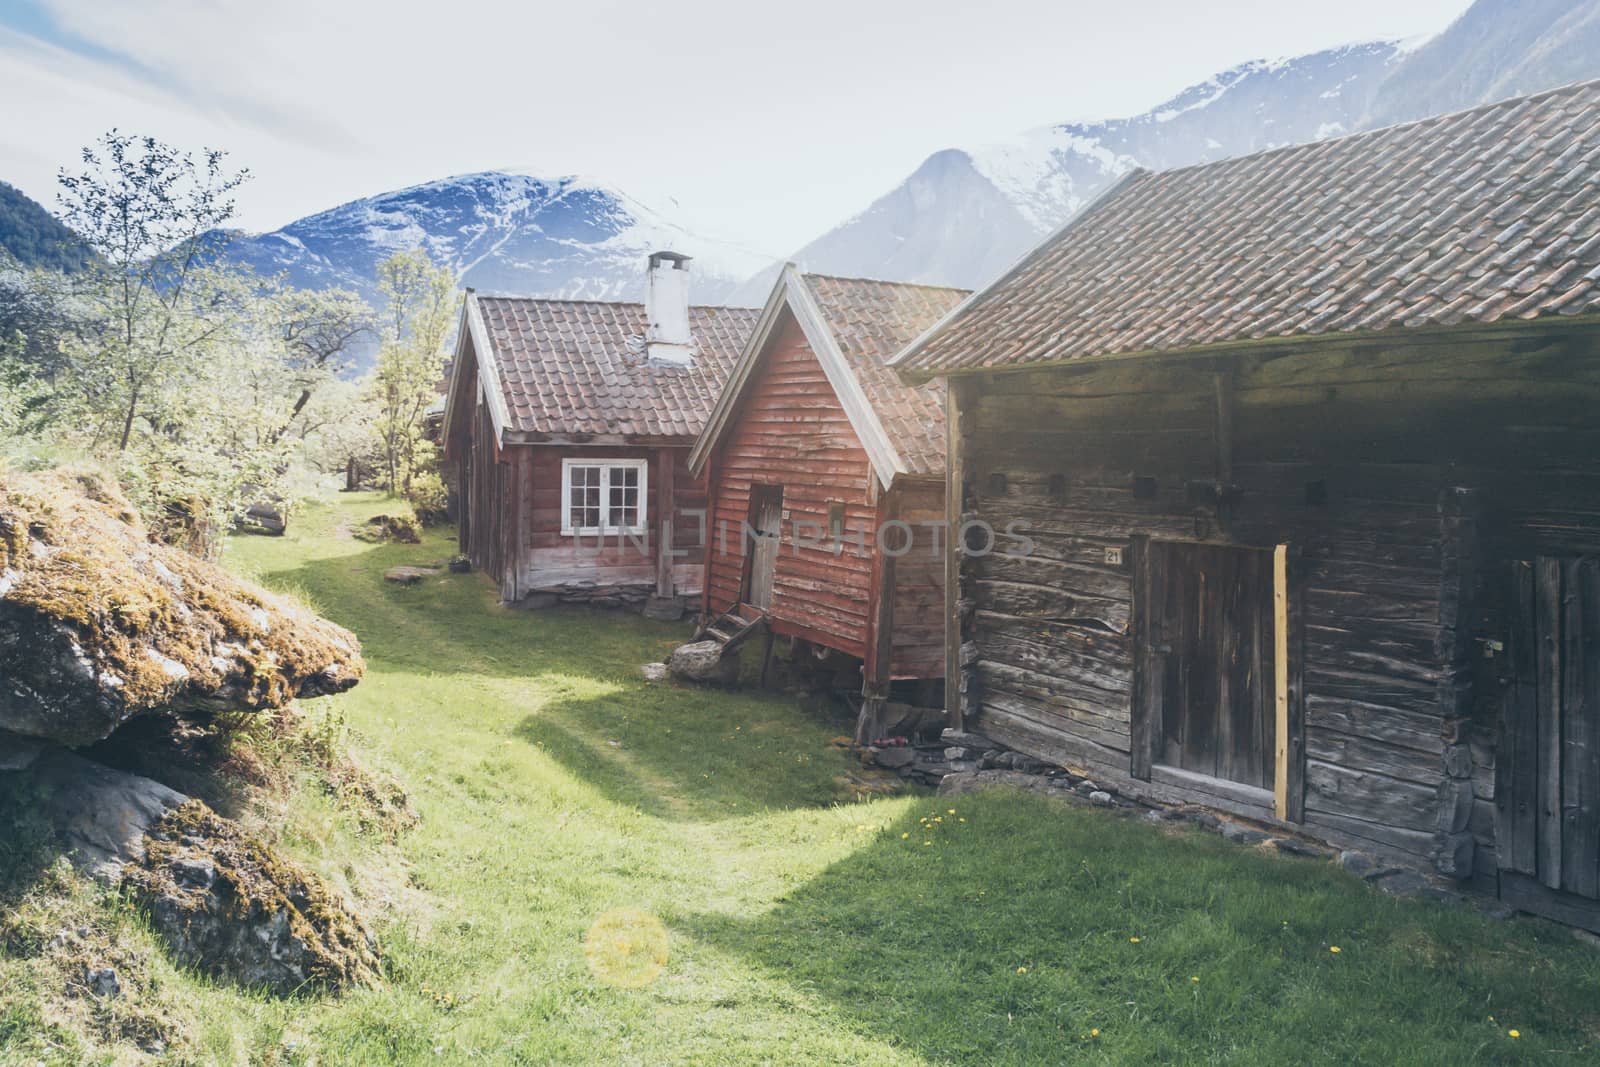 Otternes, Norway, may 2014: view on the wooden houses of this old historical farm village